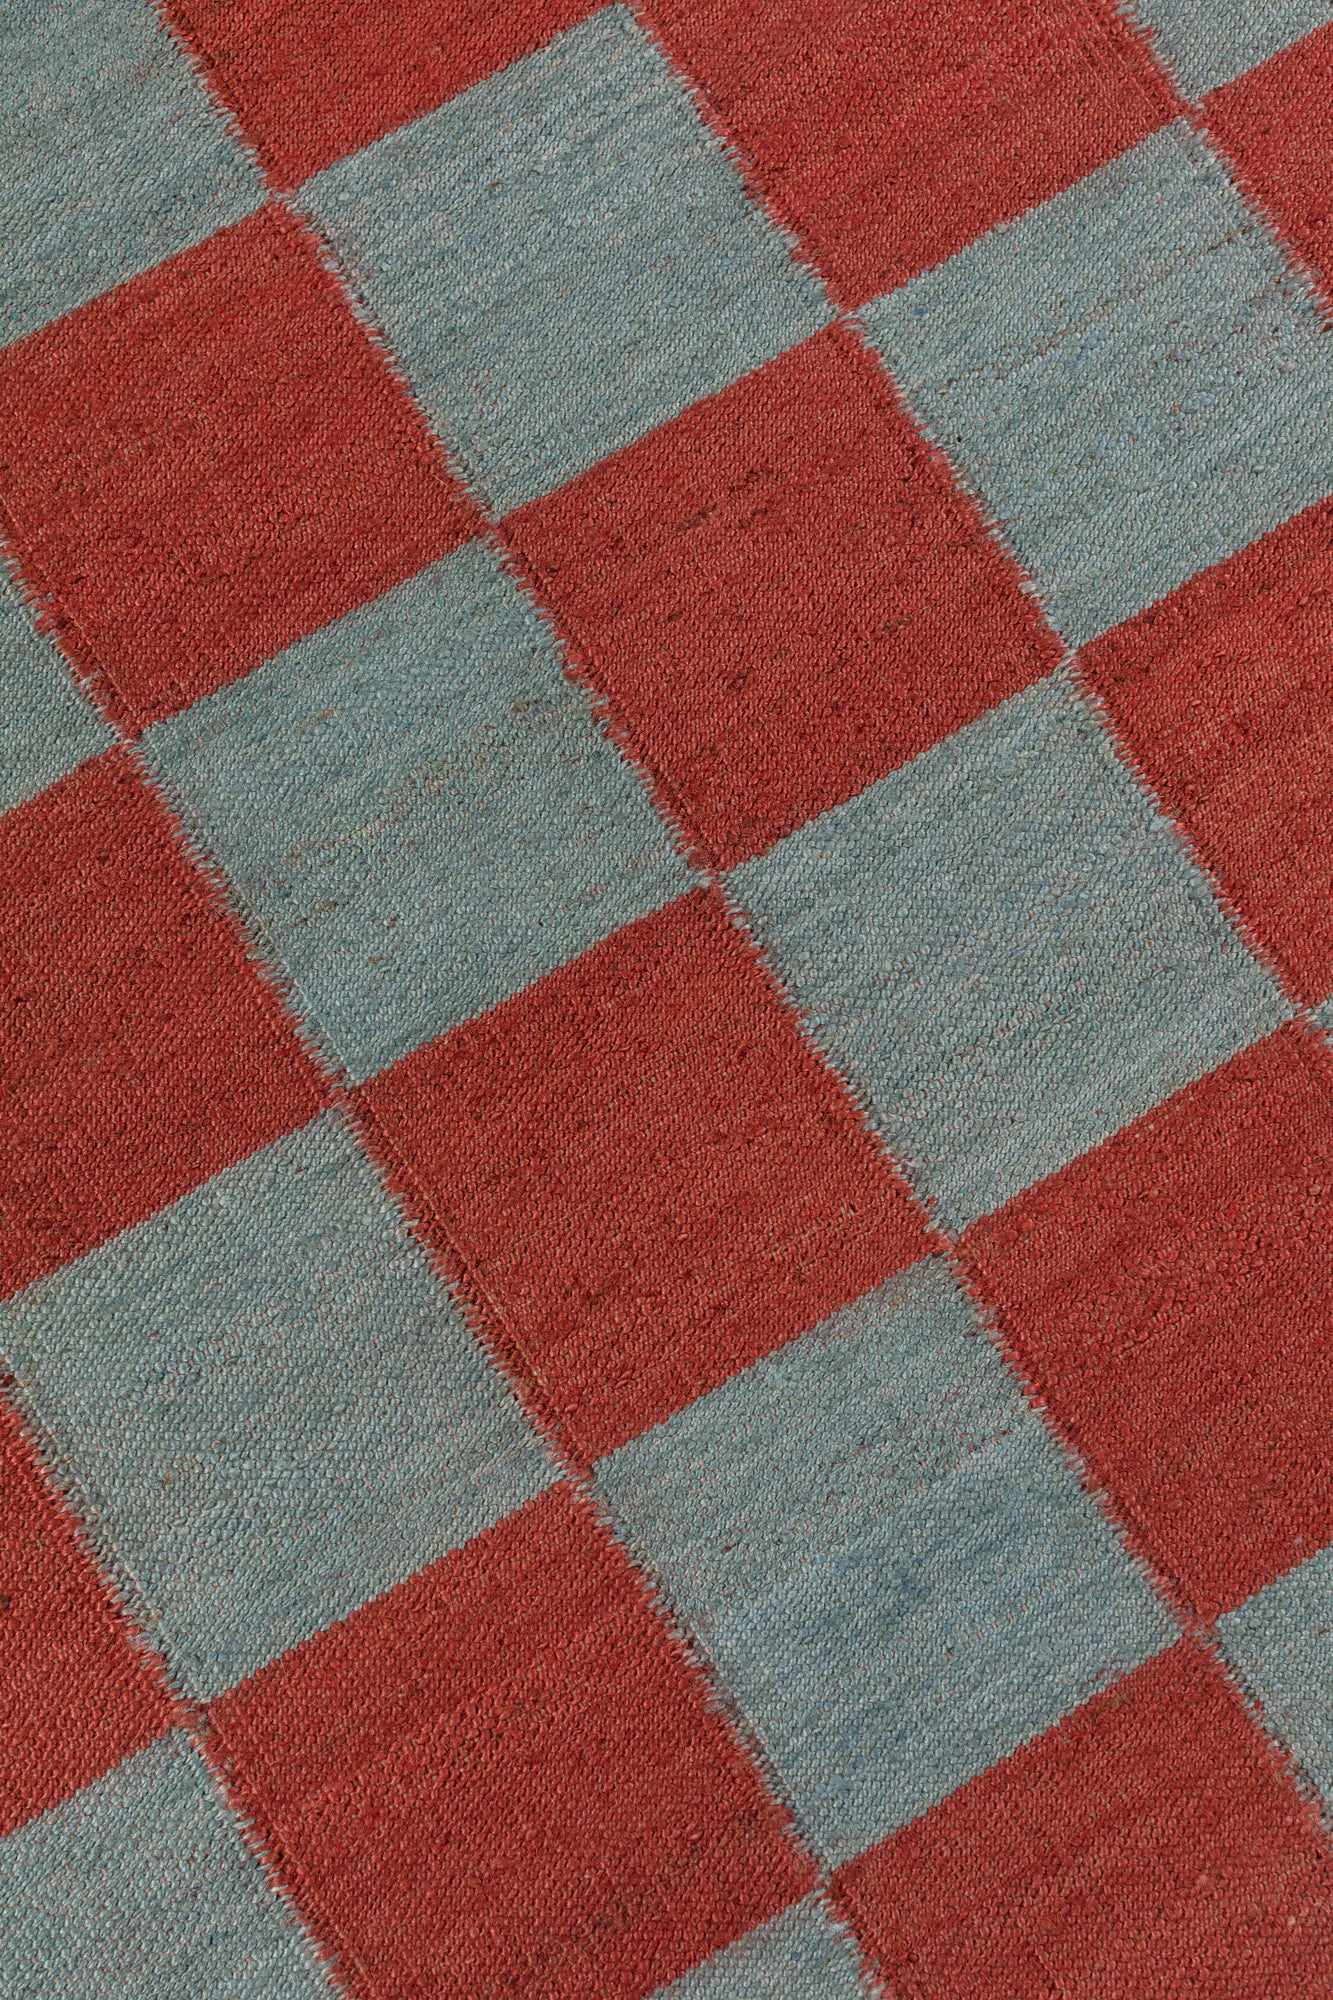 Detail of the Checkerboard Rug in Pawn, a red and sky blue checkered pattern. 